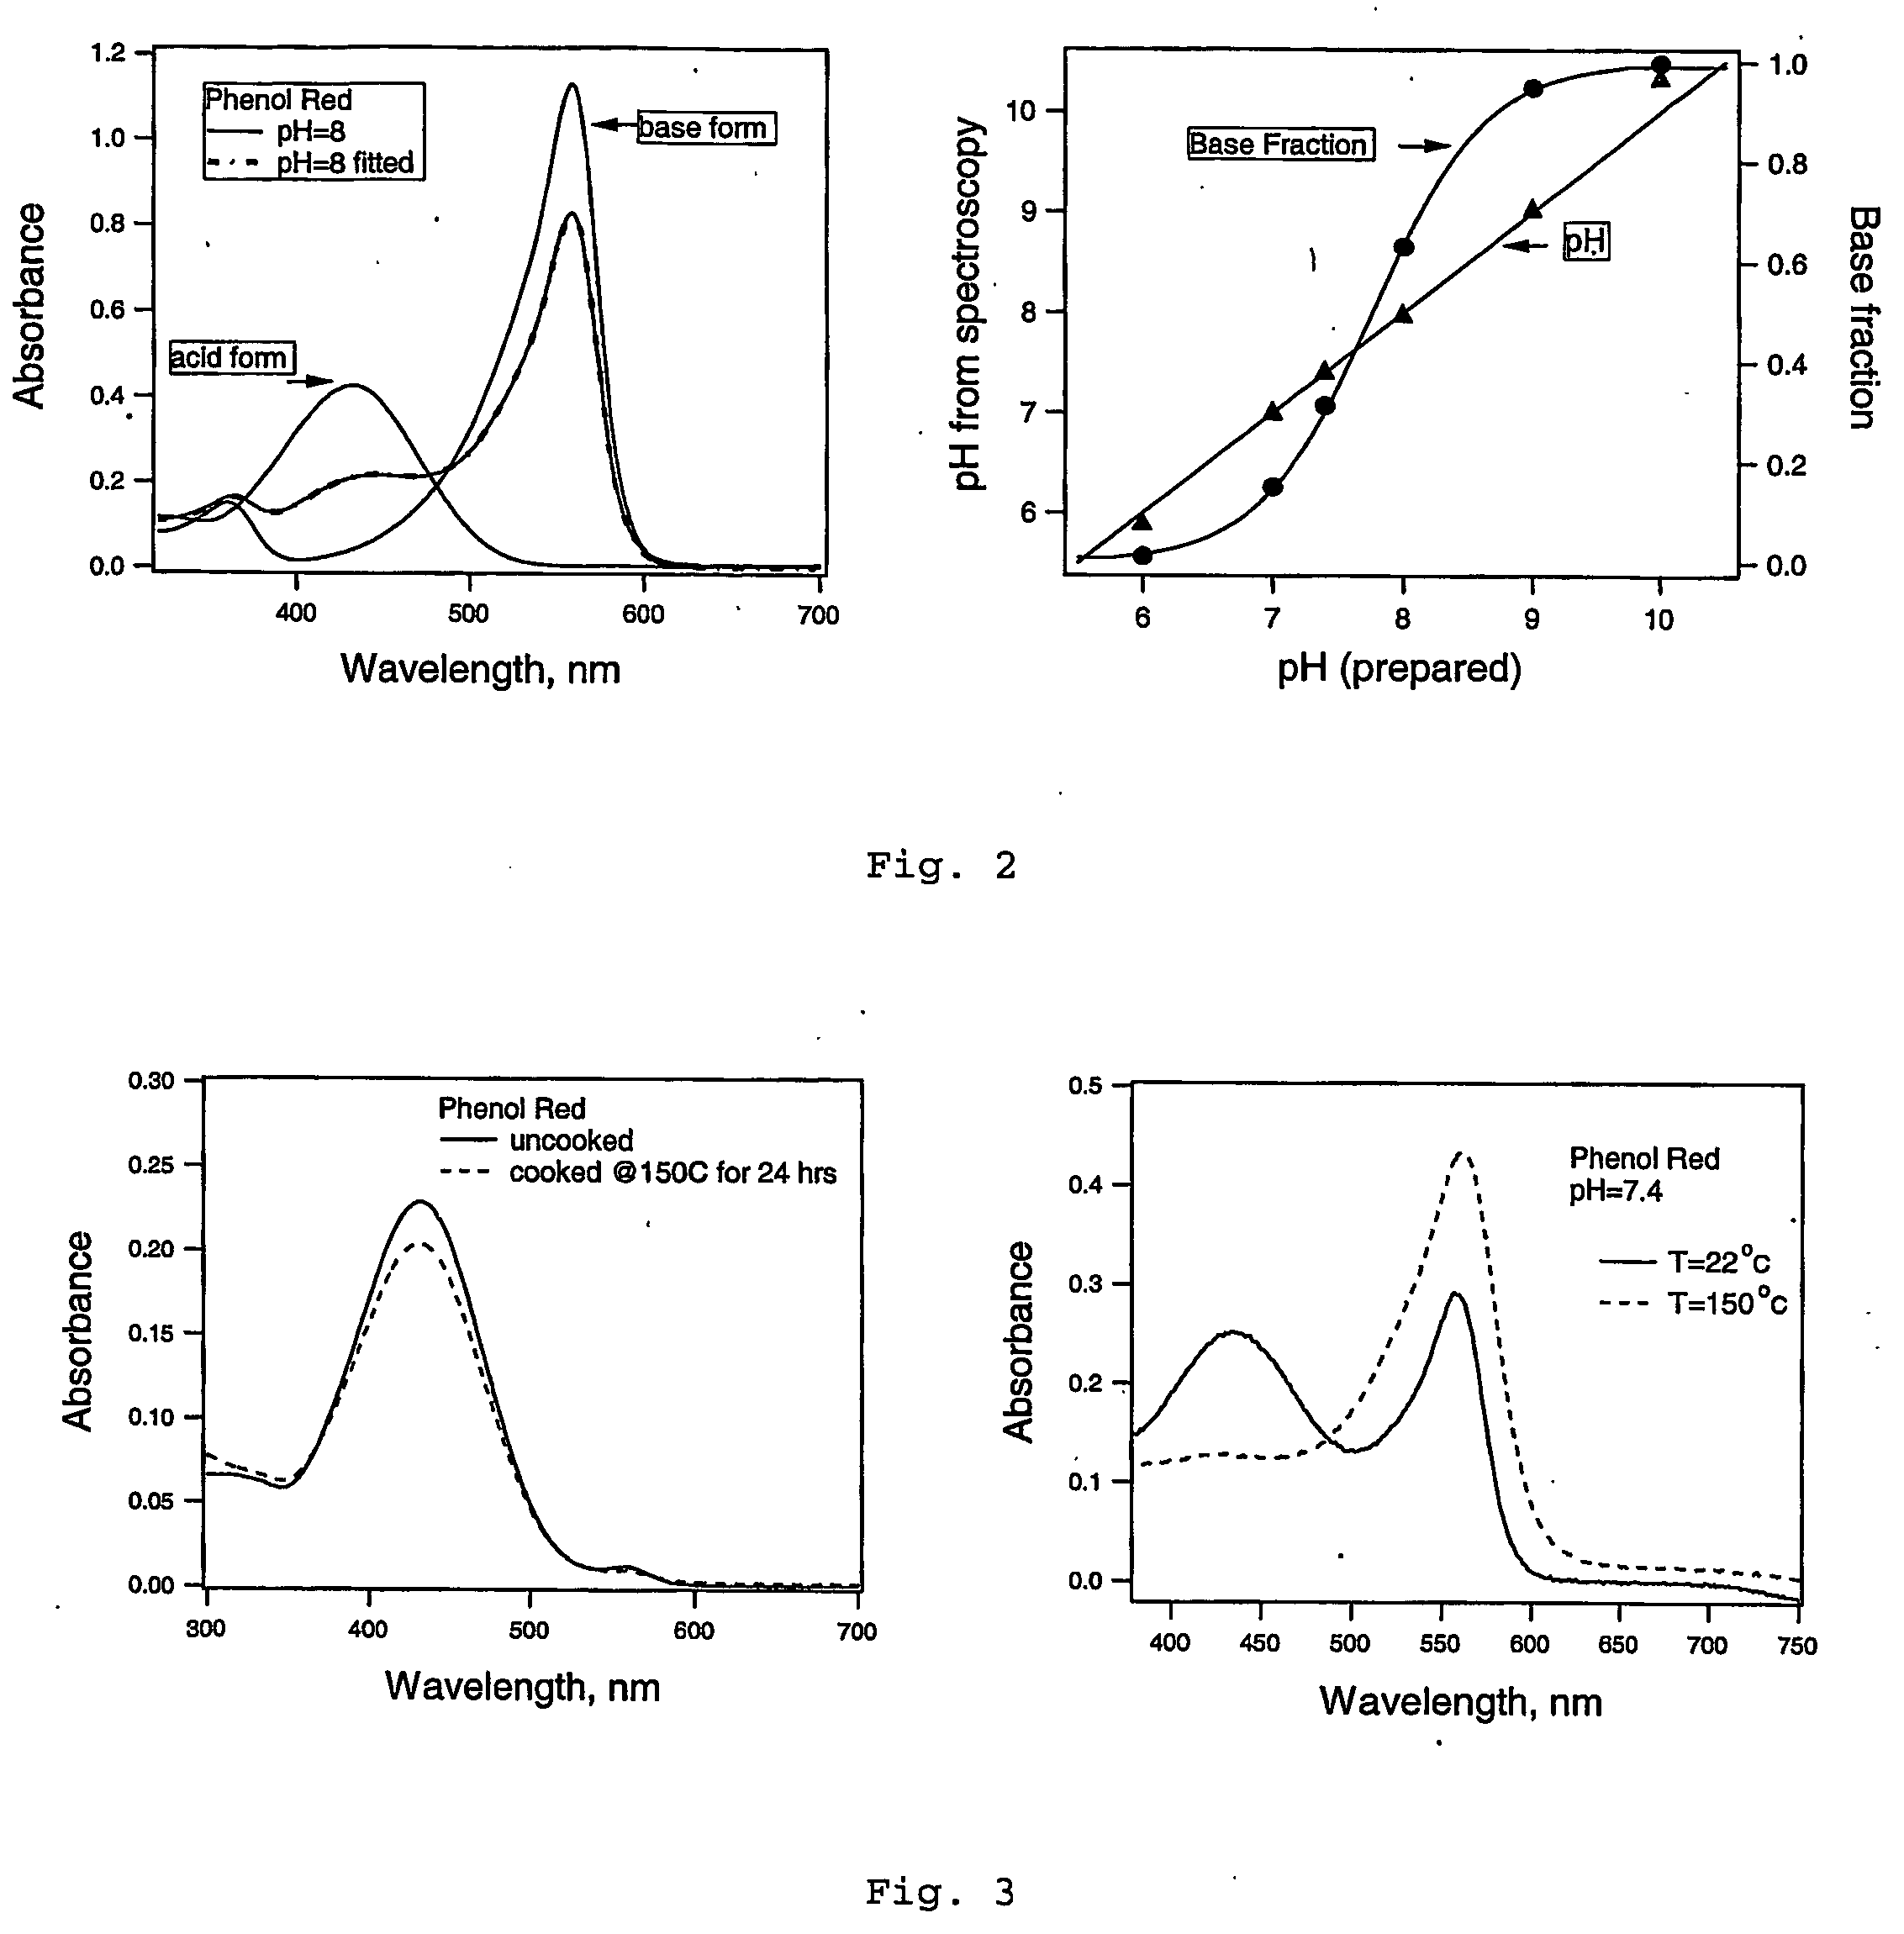 Apparatus and method for analysing downhole water chemistry